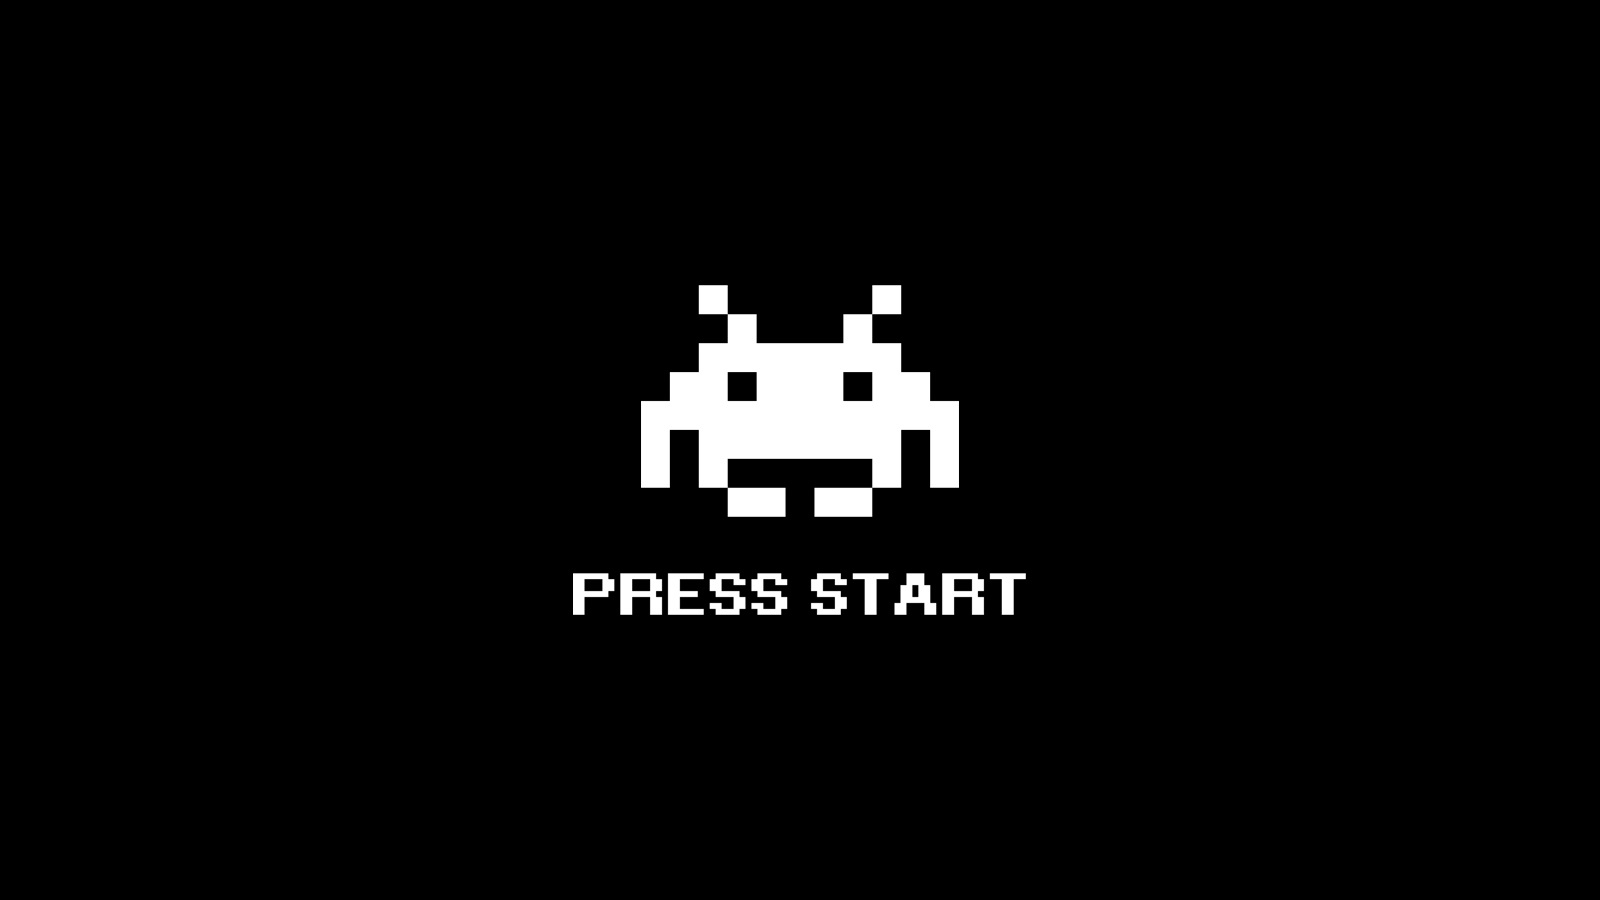 General 1600x900 black background video game art Video Game Creatures Space Invaders pixels retro games text